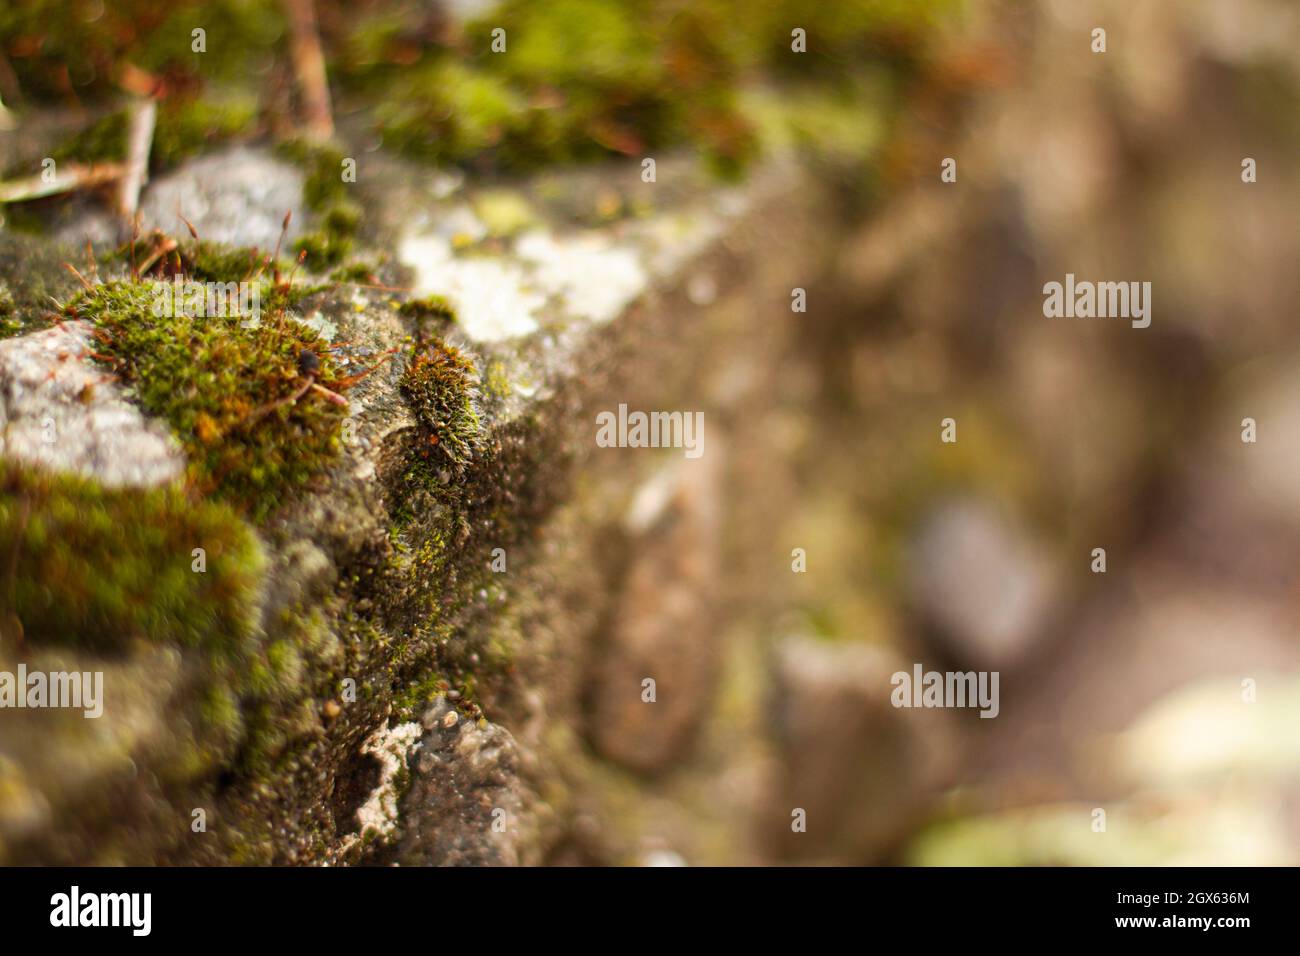 Close up of green moss among pebbles. Nature concept with copy space outdoor on daylight shot Stock Photo